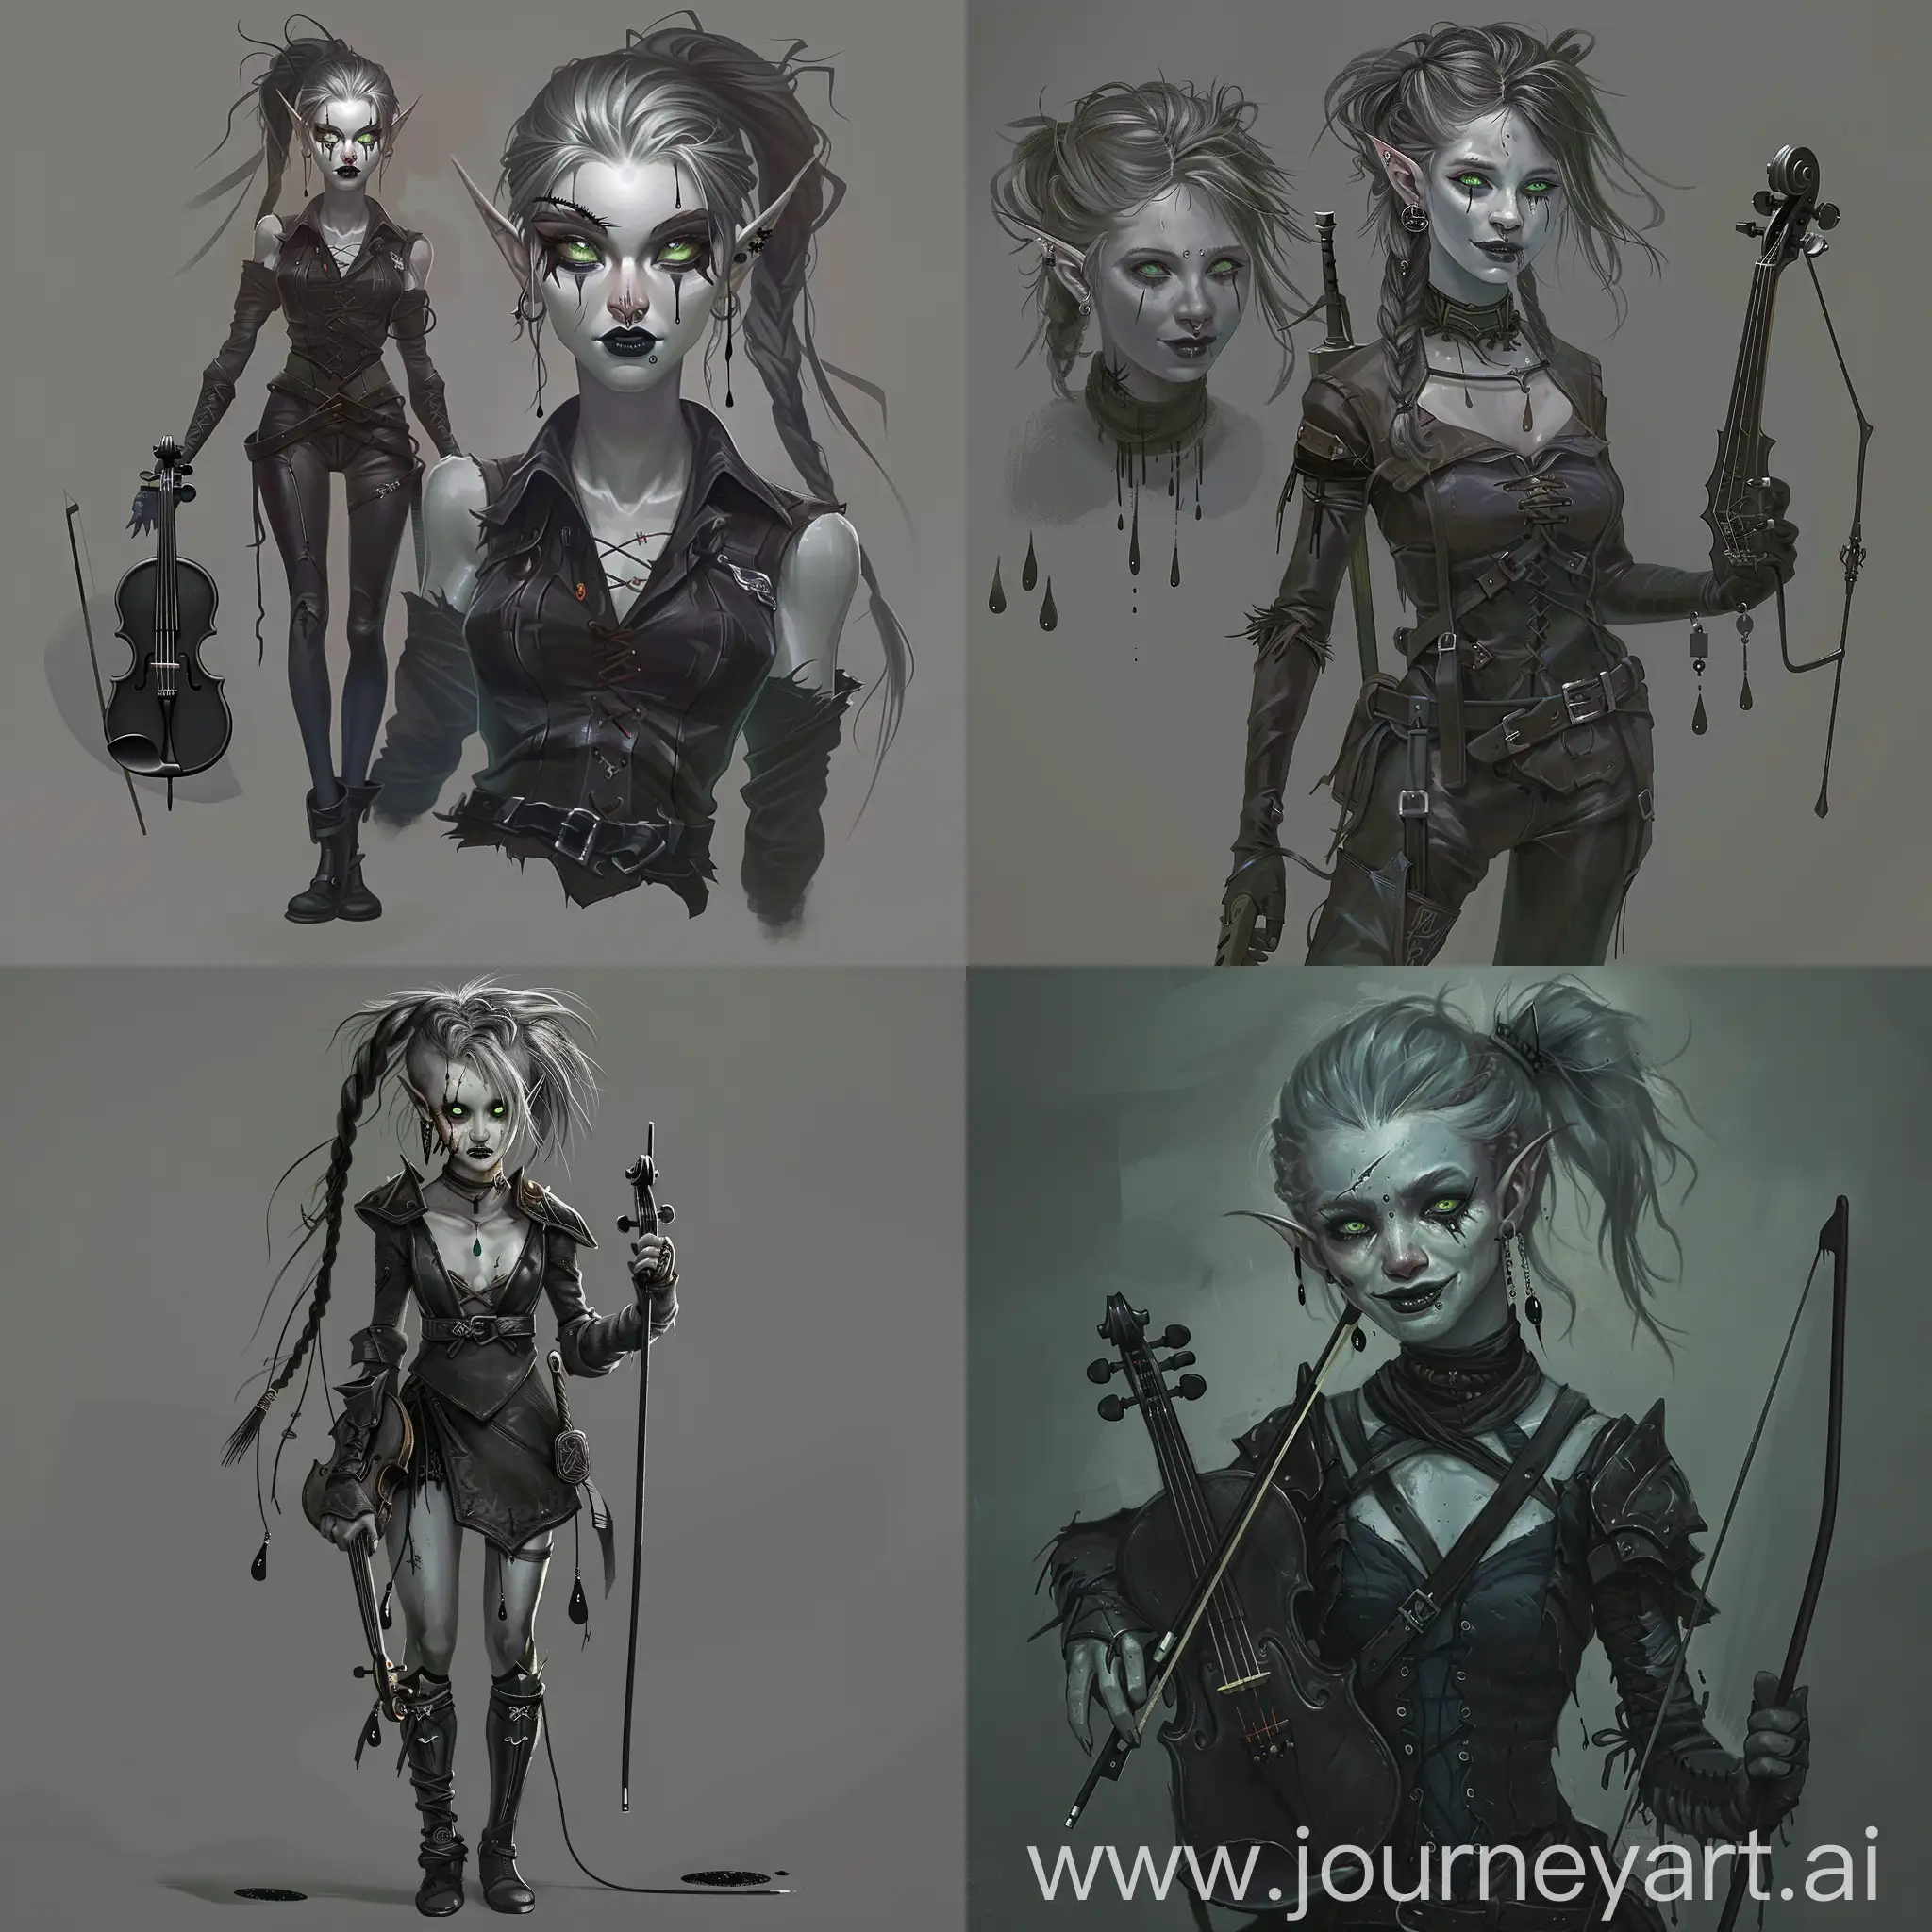 Character concept art. Full body. Young woman dark elf (Drow) with pale skin color and ash braided hair. She has messy hairstyle, dark green glowy eyes, dark lips and black teardrops. Her look is sadistic and evel (crazy) smile. She has eyebrow piercing, ear piercing, black slim leather armor, violin in left hand, rapier in right hand (she play violin by the rapier). She wear strict shirt with open neck and long sleeves and high pank black shoes. She look like bard from DnD. Midnight. Image is sinister and in dark gray tones.